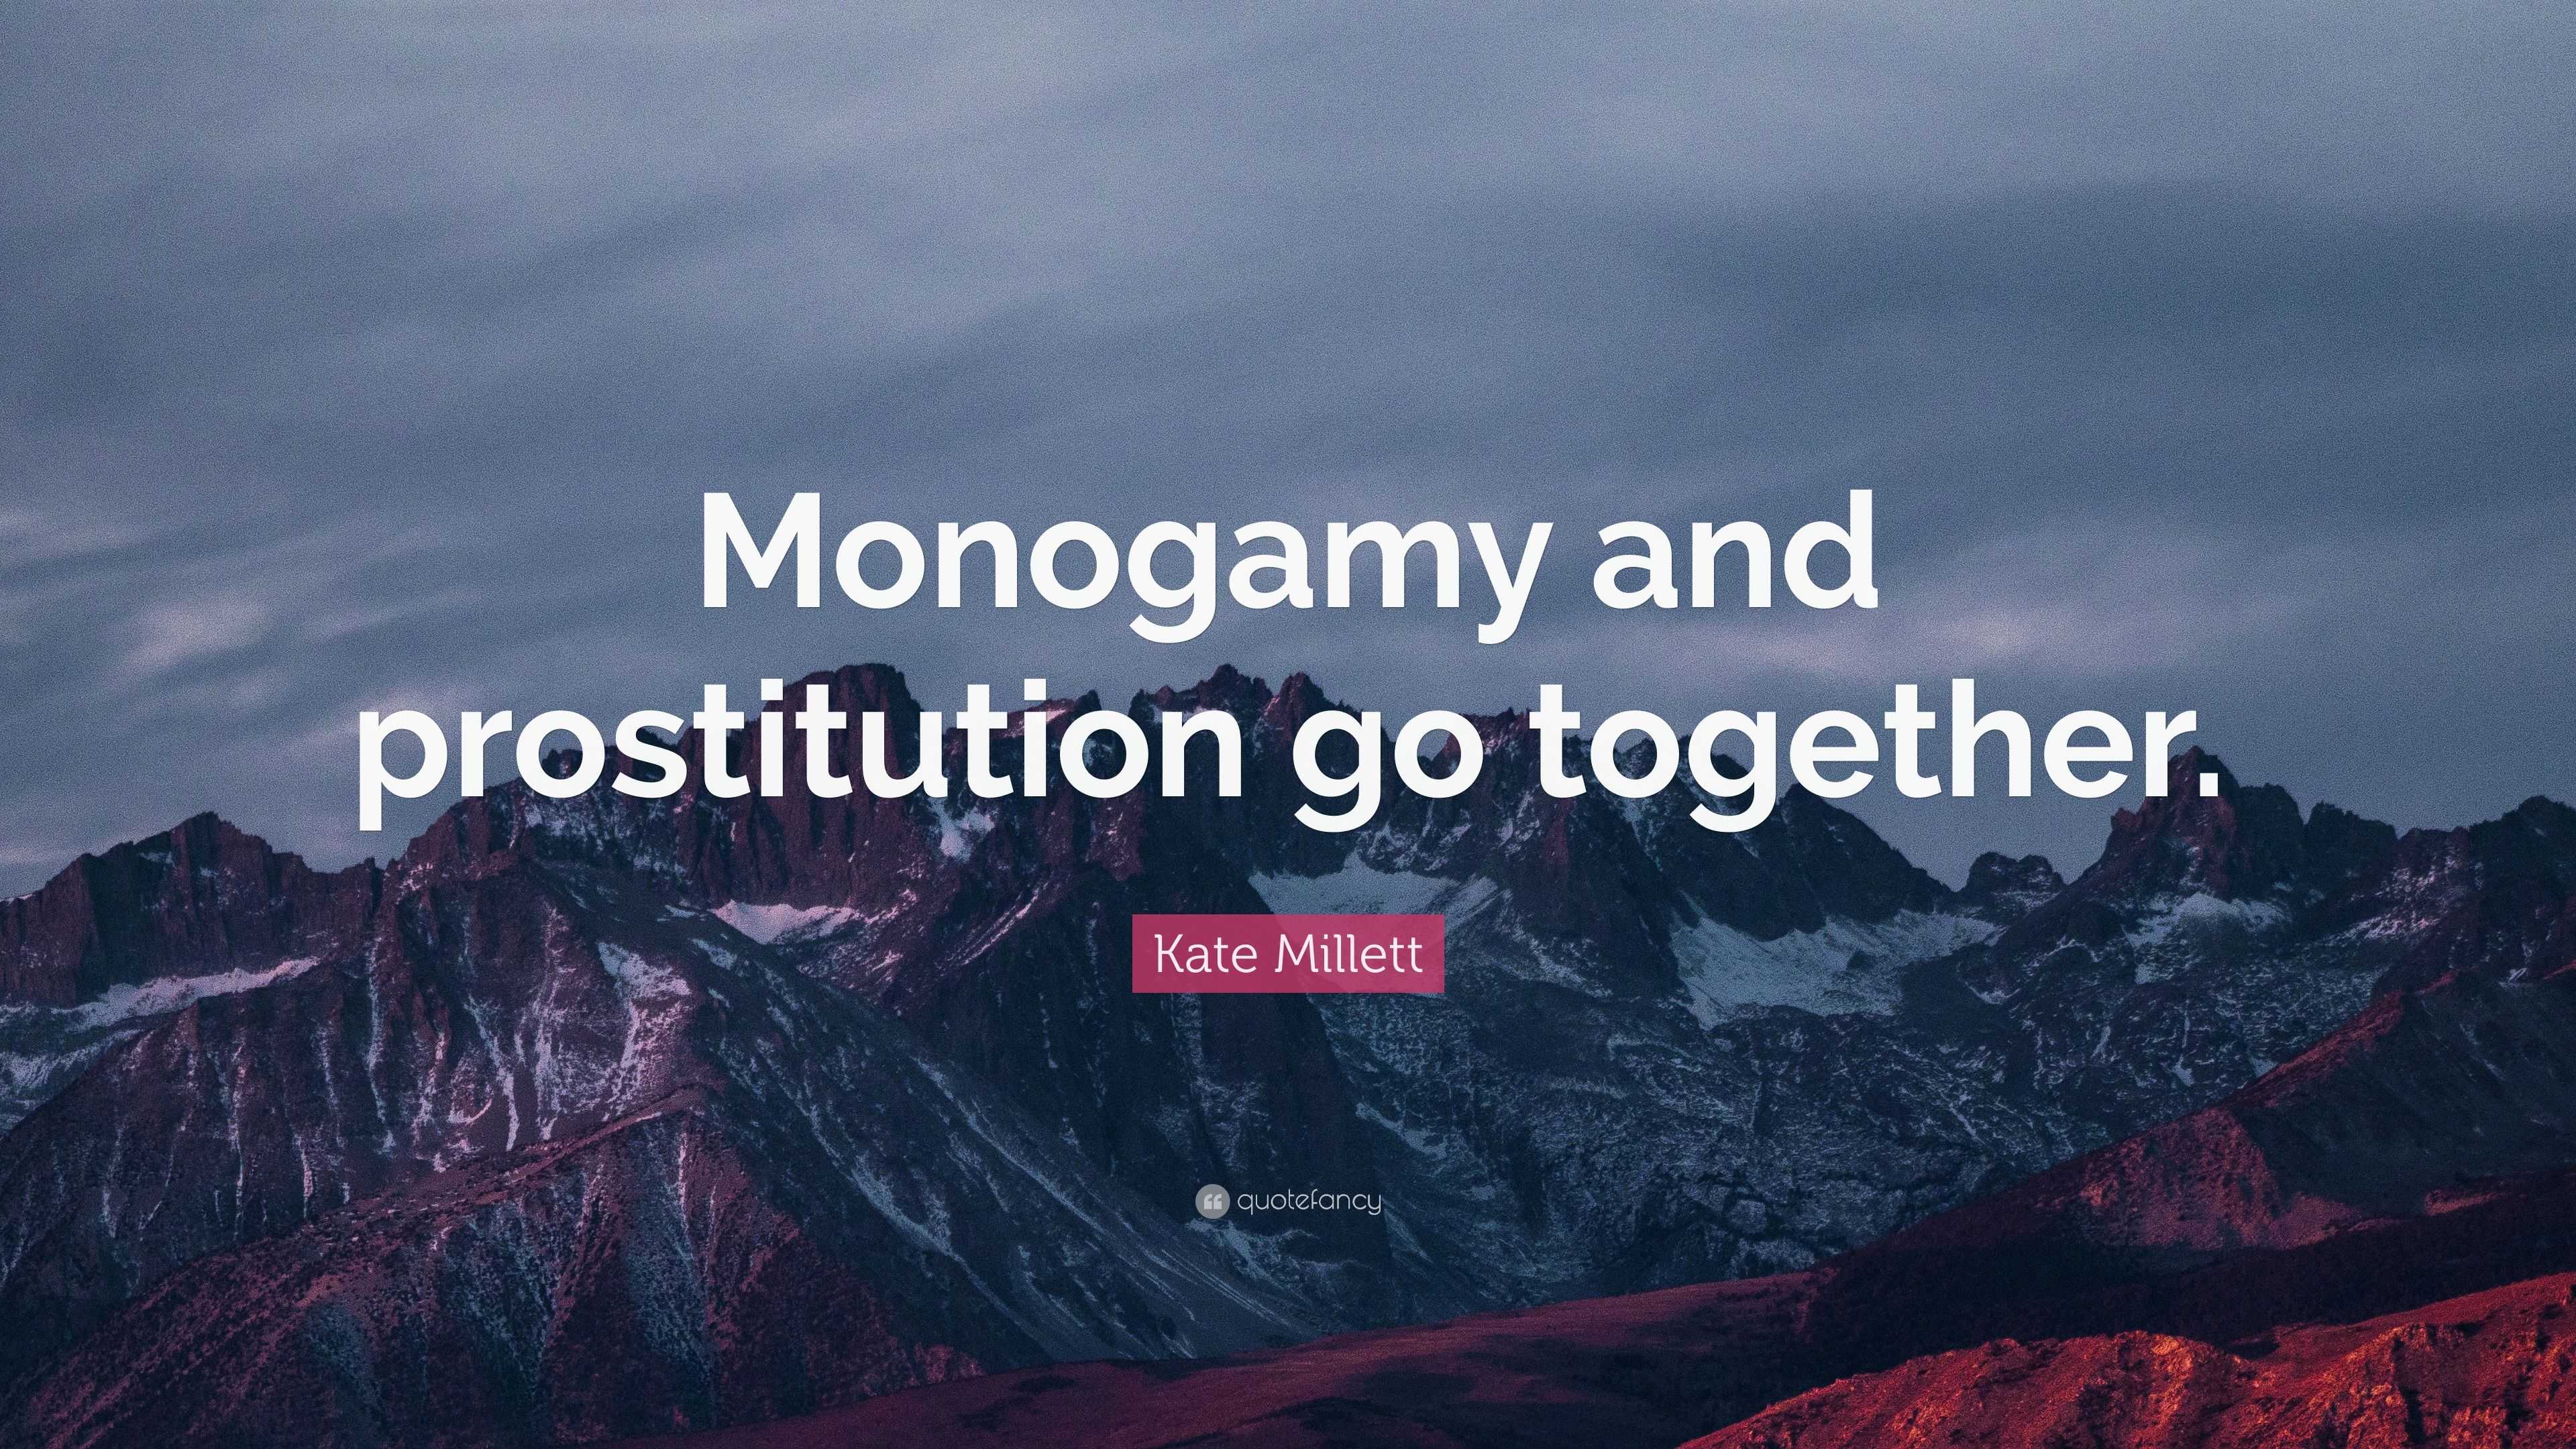 Kate Millett Quote: “Monogamy and